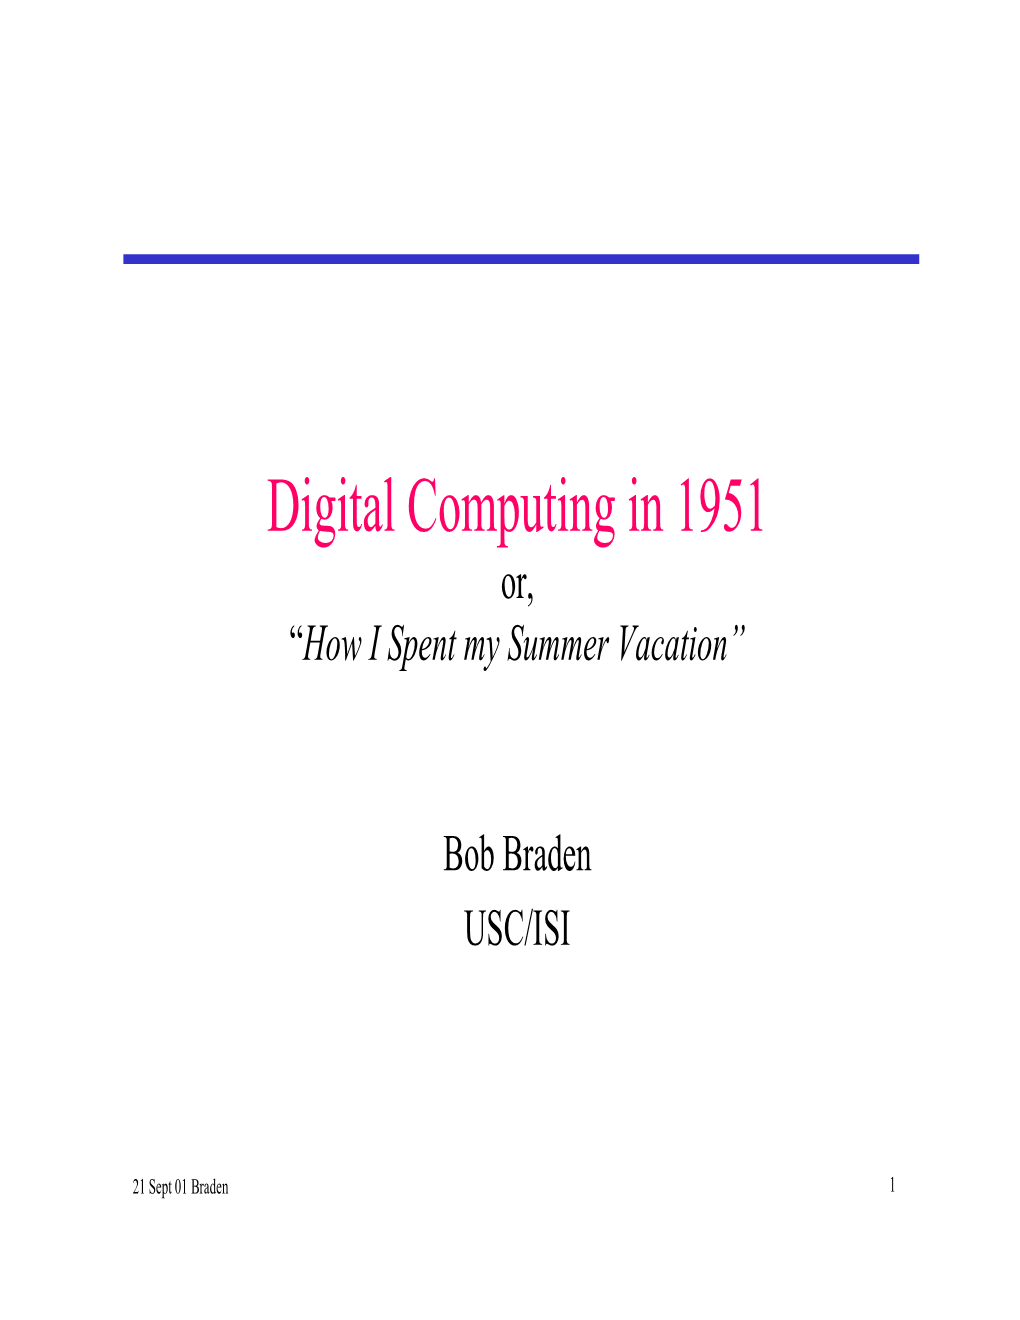 Digital Computing in 1951 Or, “How I Spent My Summer Vacation”